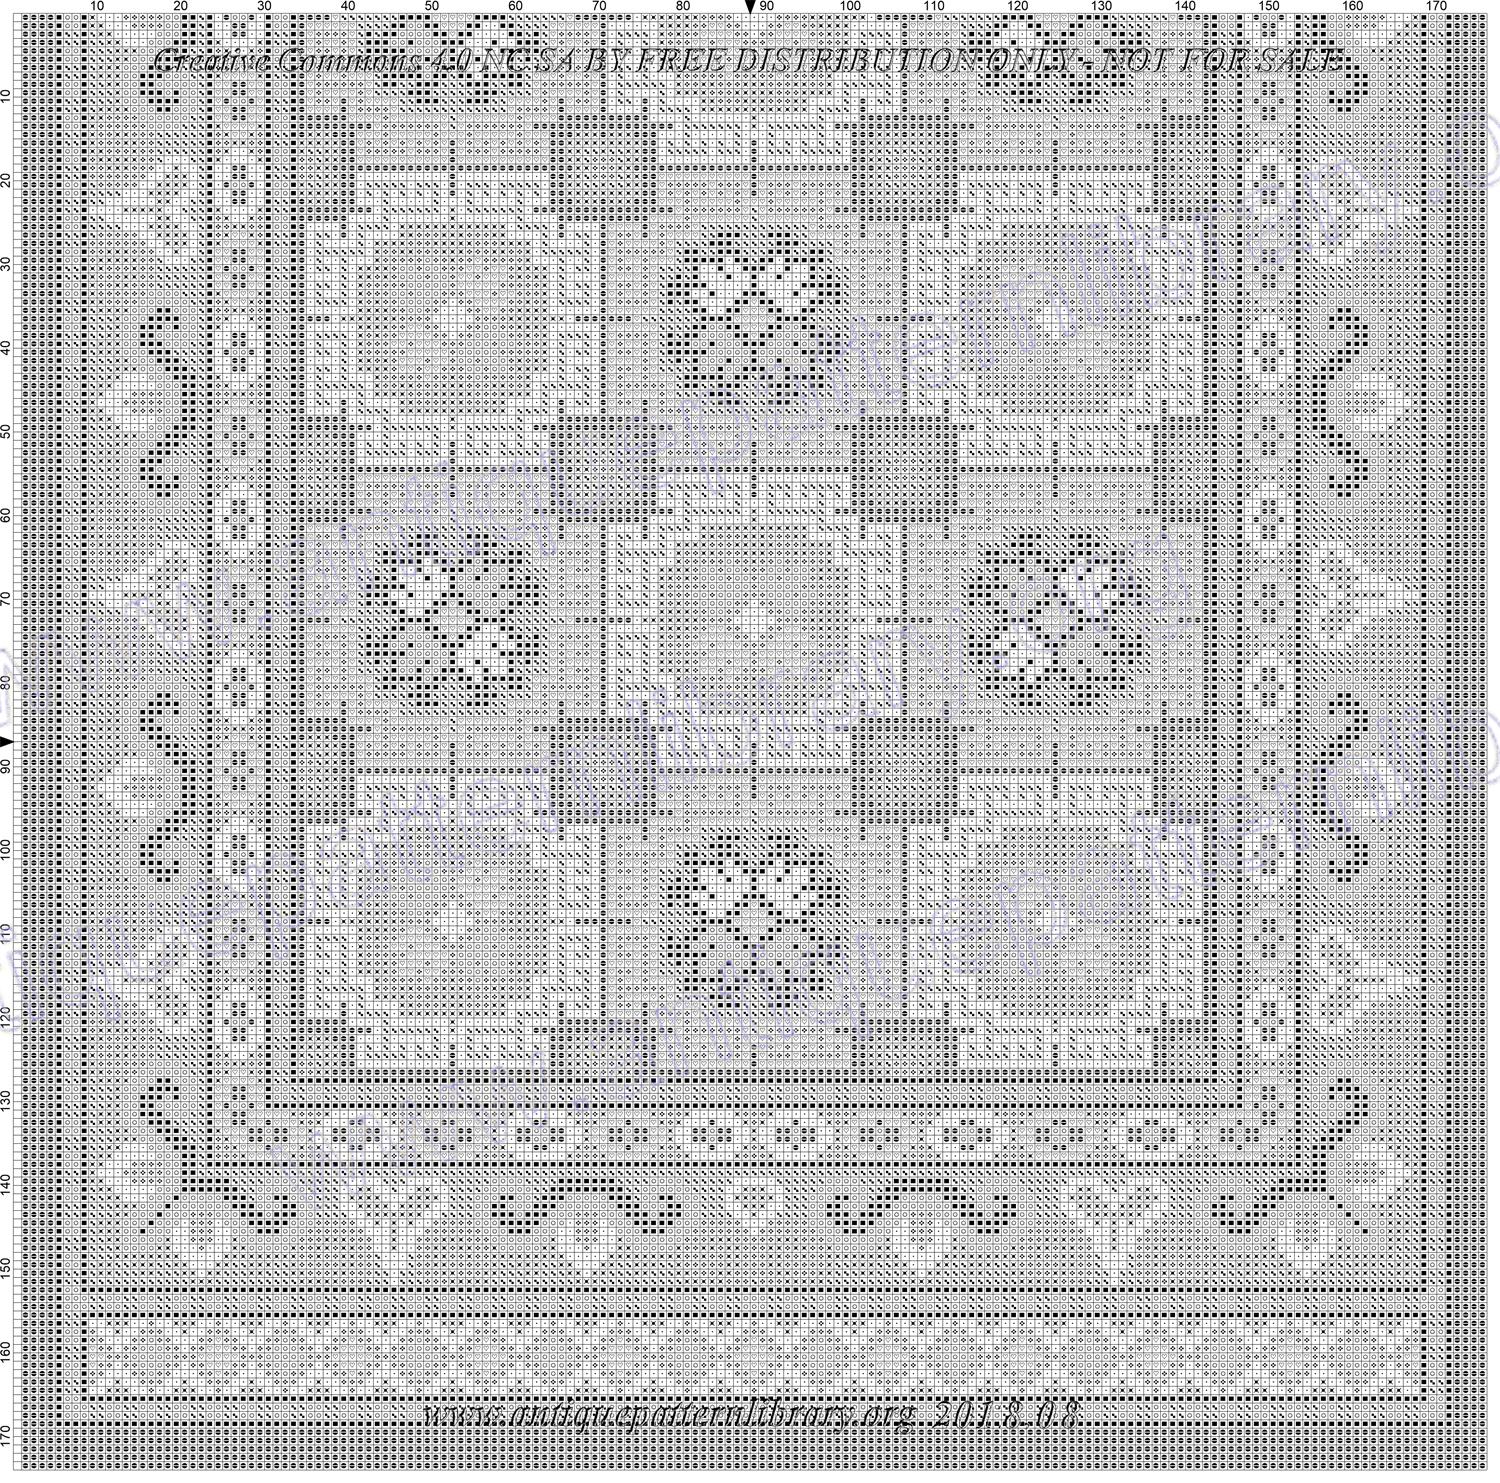 A-MH001 Tapestry design